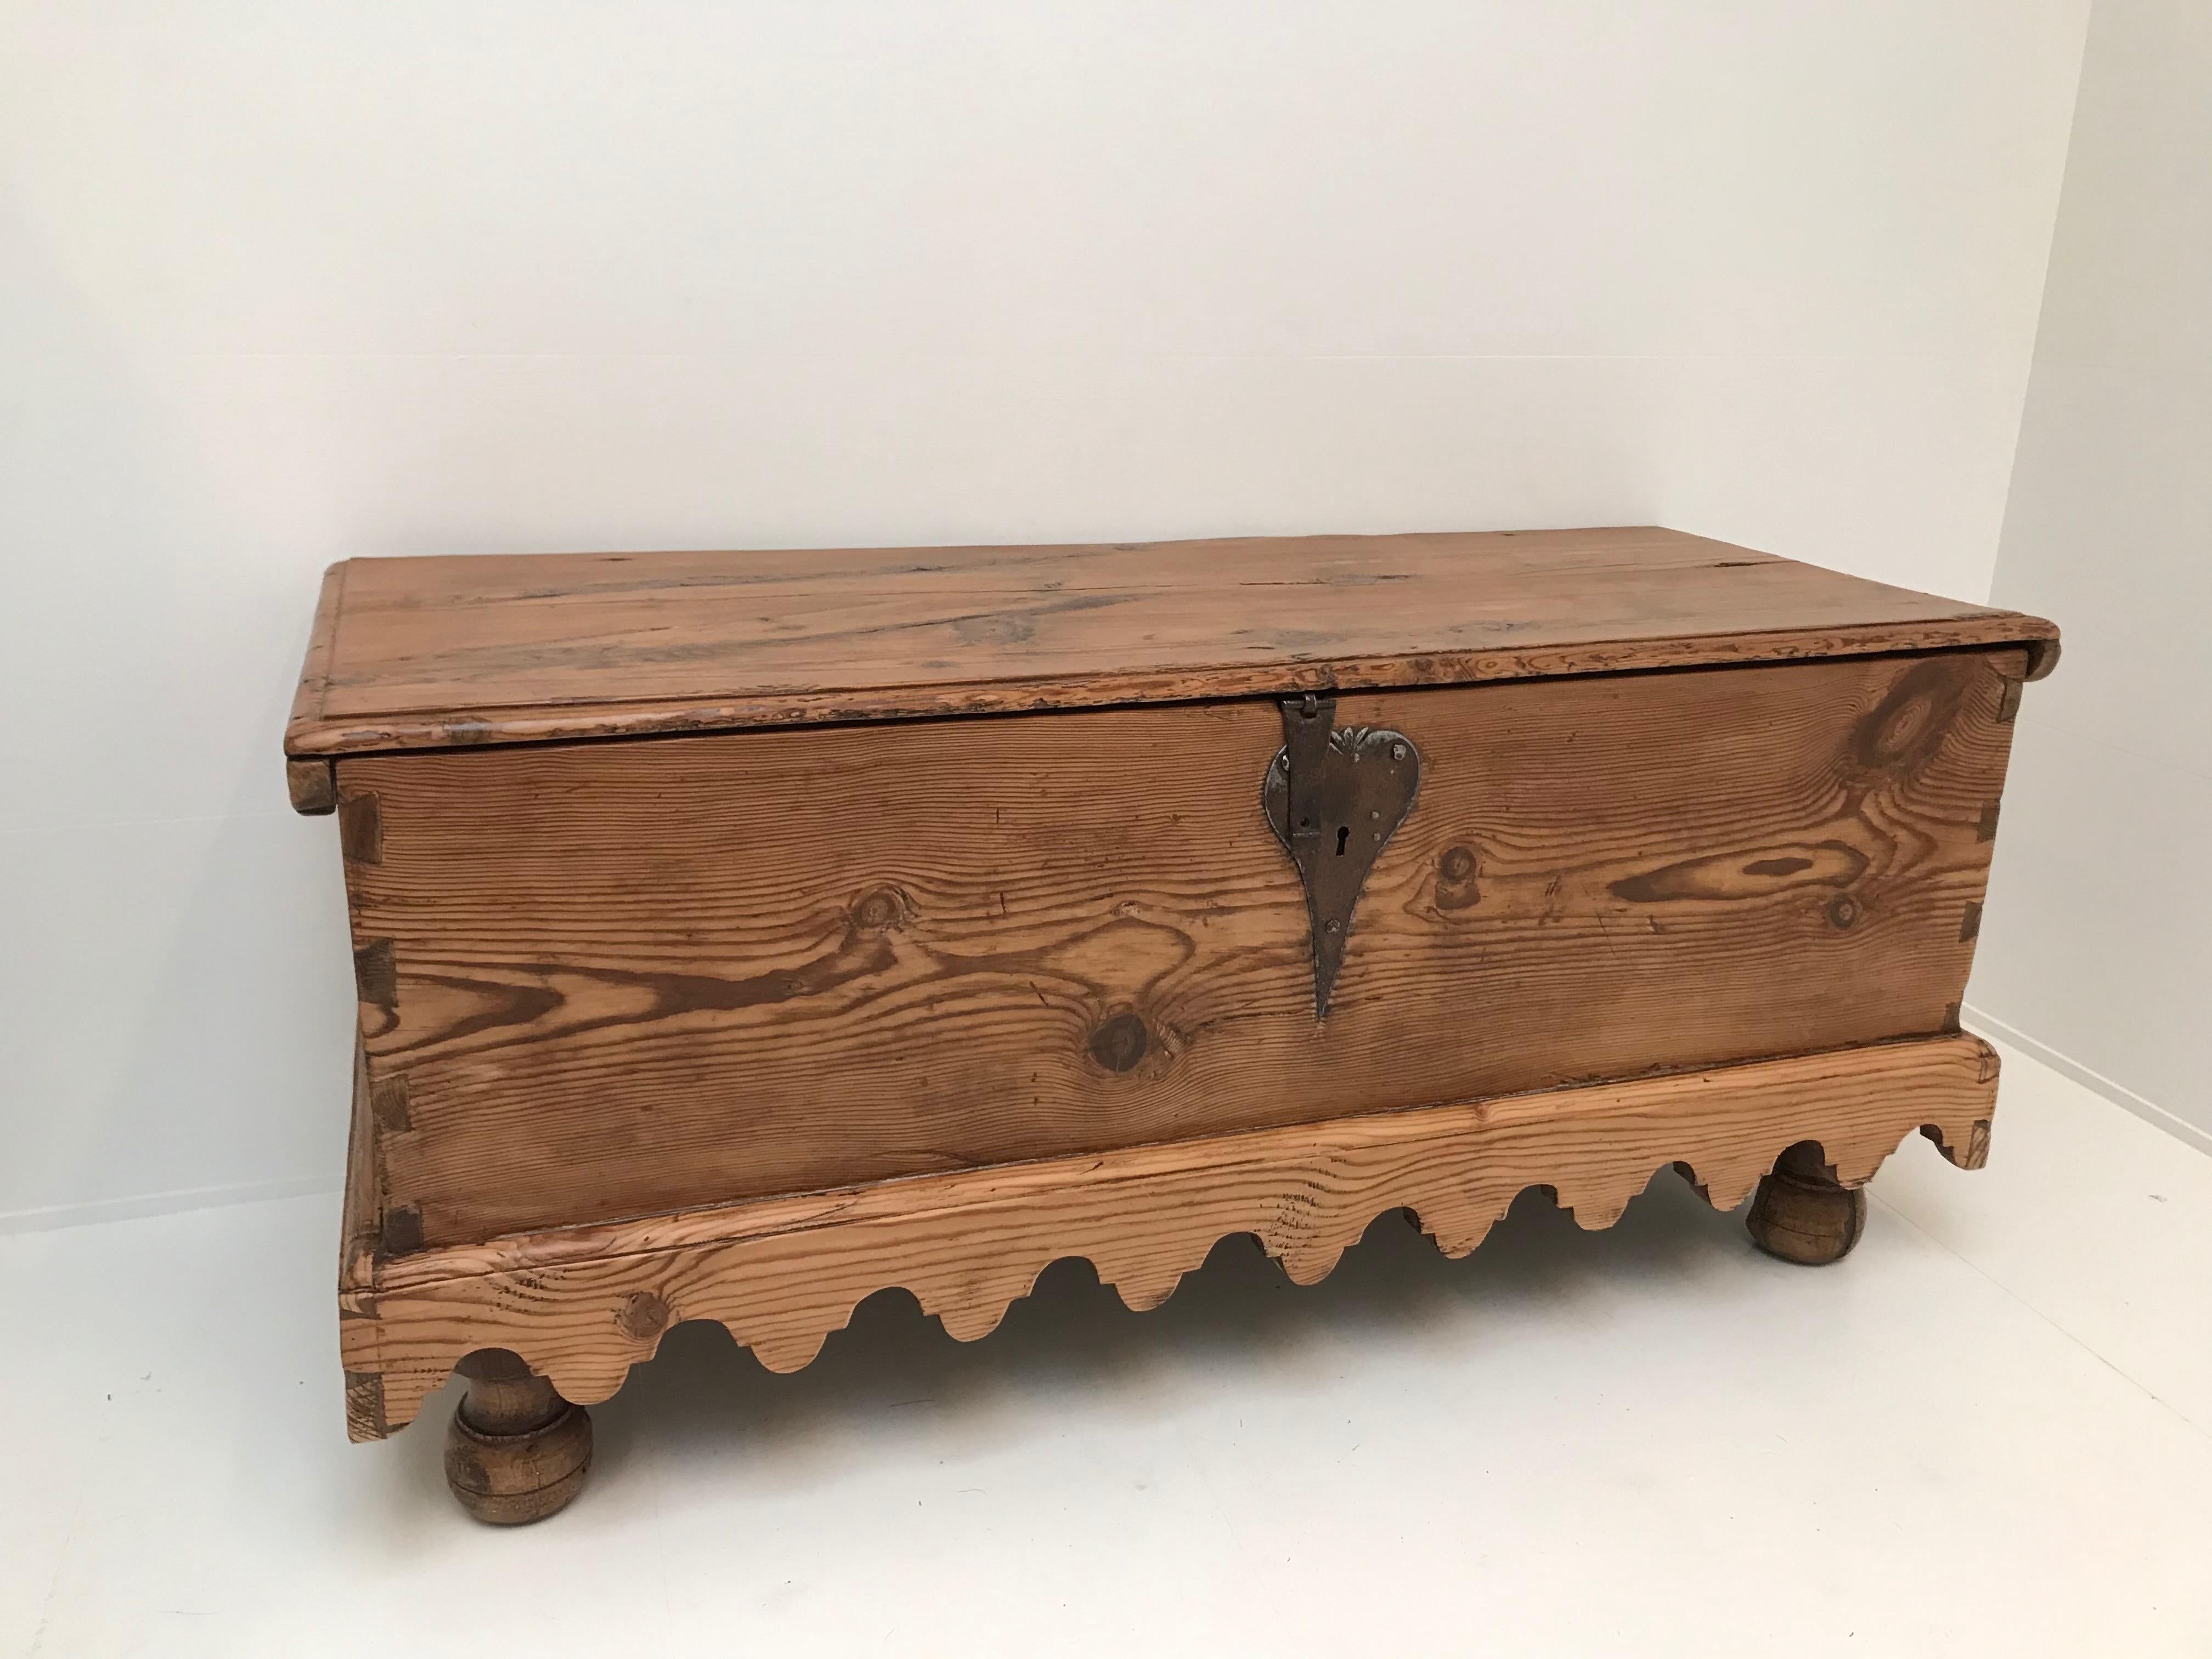 Nicely patinated aged pine, Spanish trunk or coffer
Original hardware in a nice heart shaped form
Beautiful aging
Perfect at the foot of a bed or behind a couch.